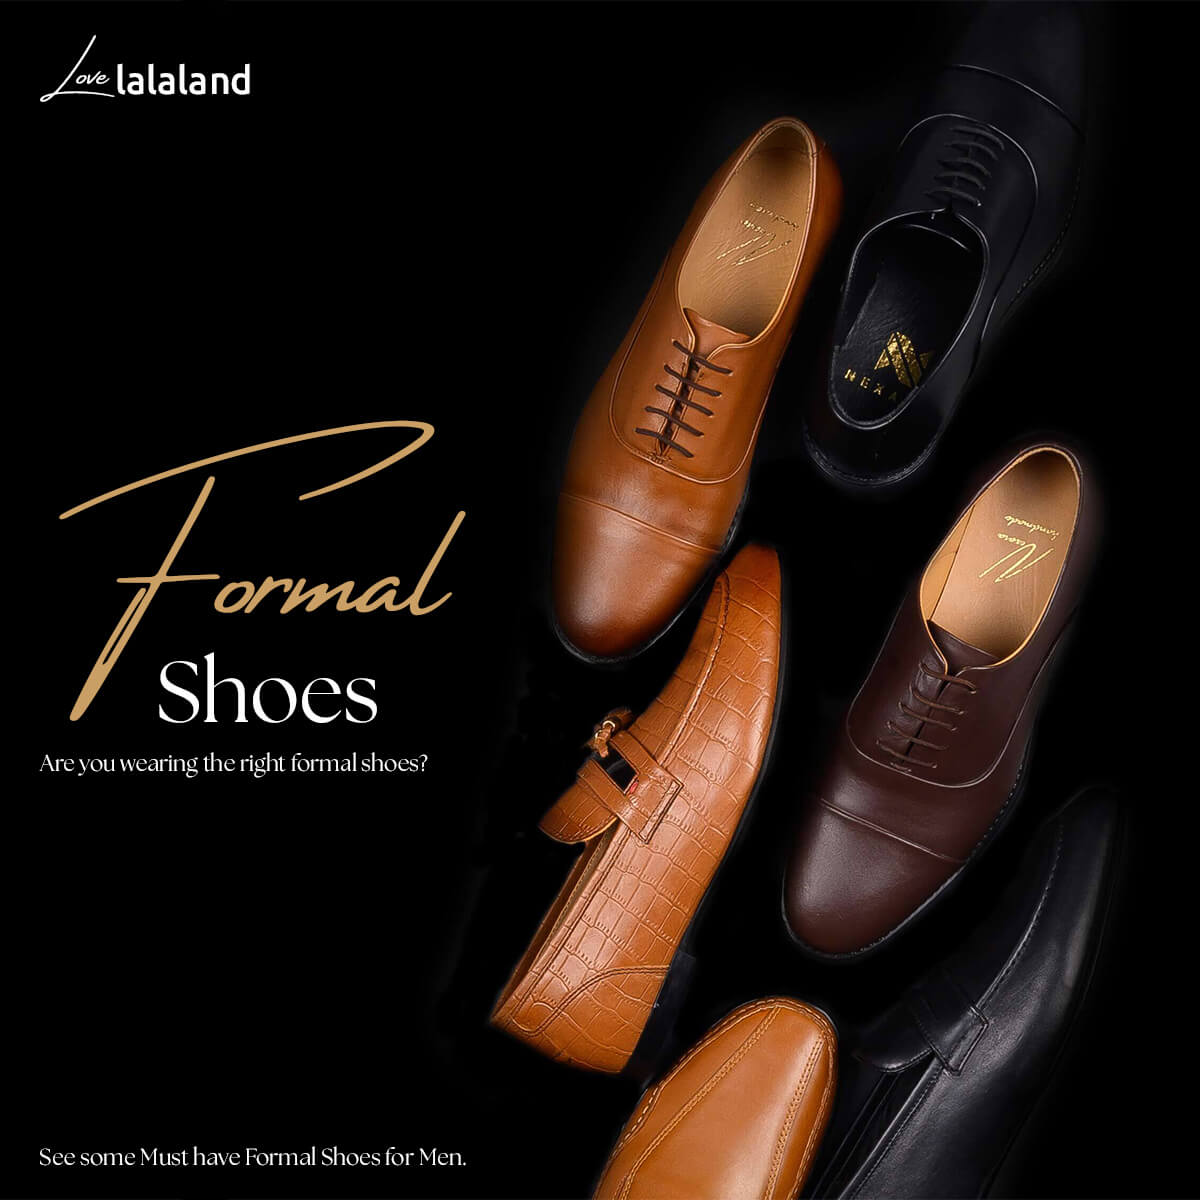 Are You Wearing the Right Formal Shoes? See Some Must-Have Formal Shoes for Men!